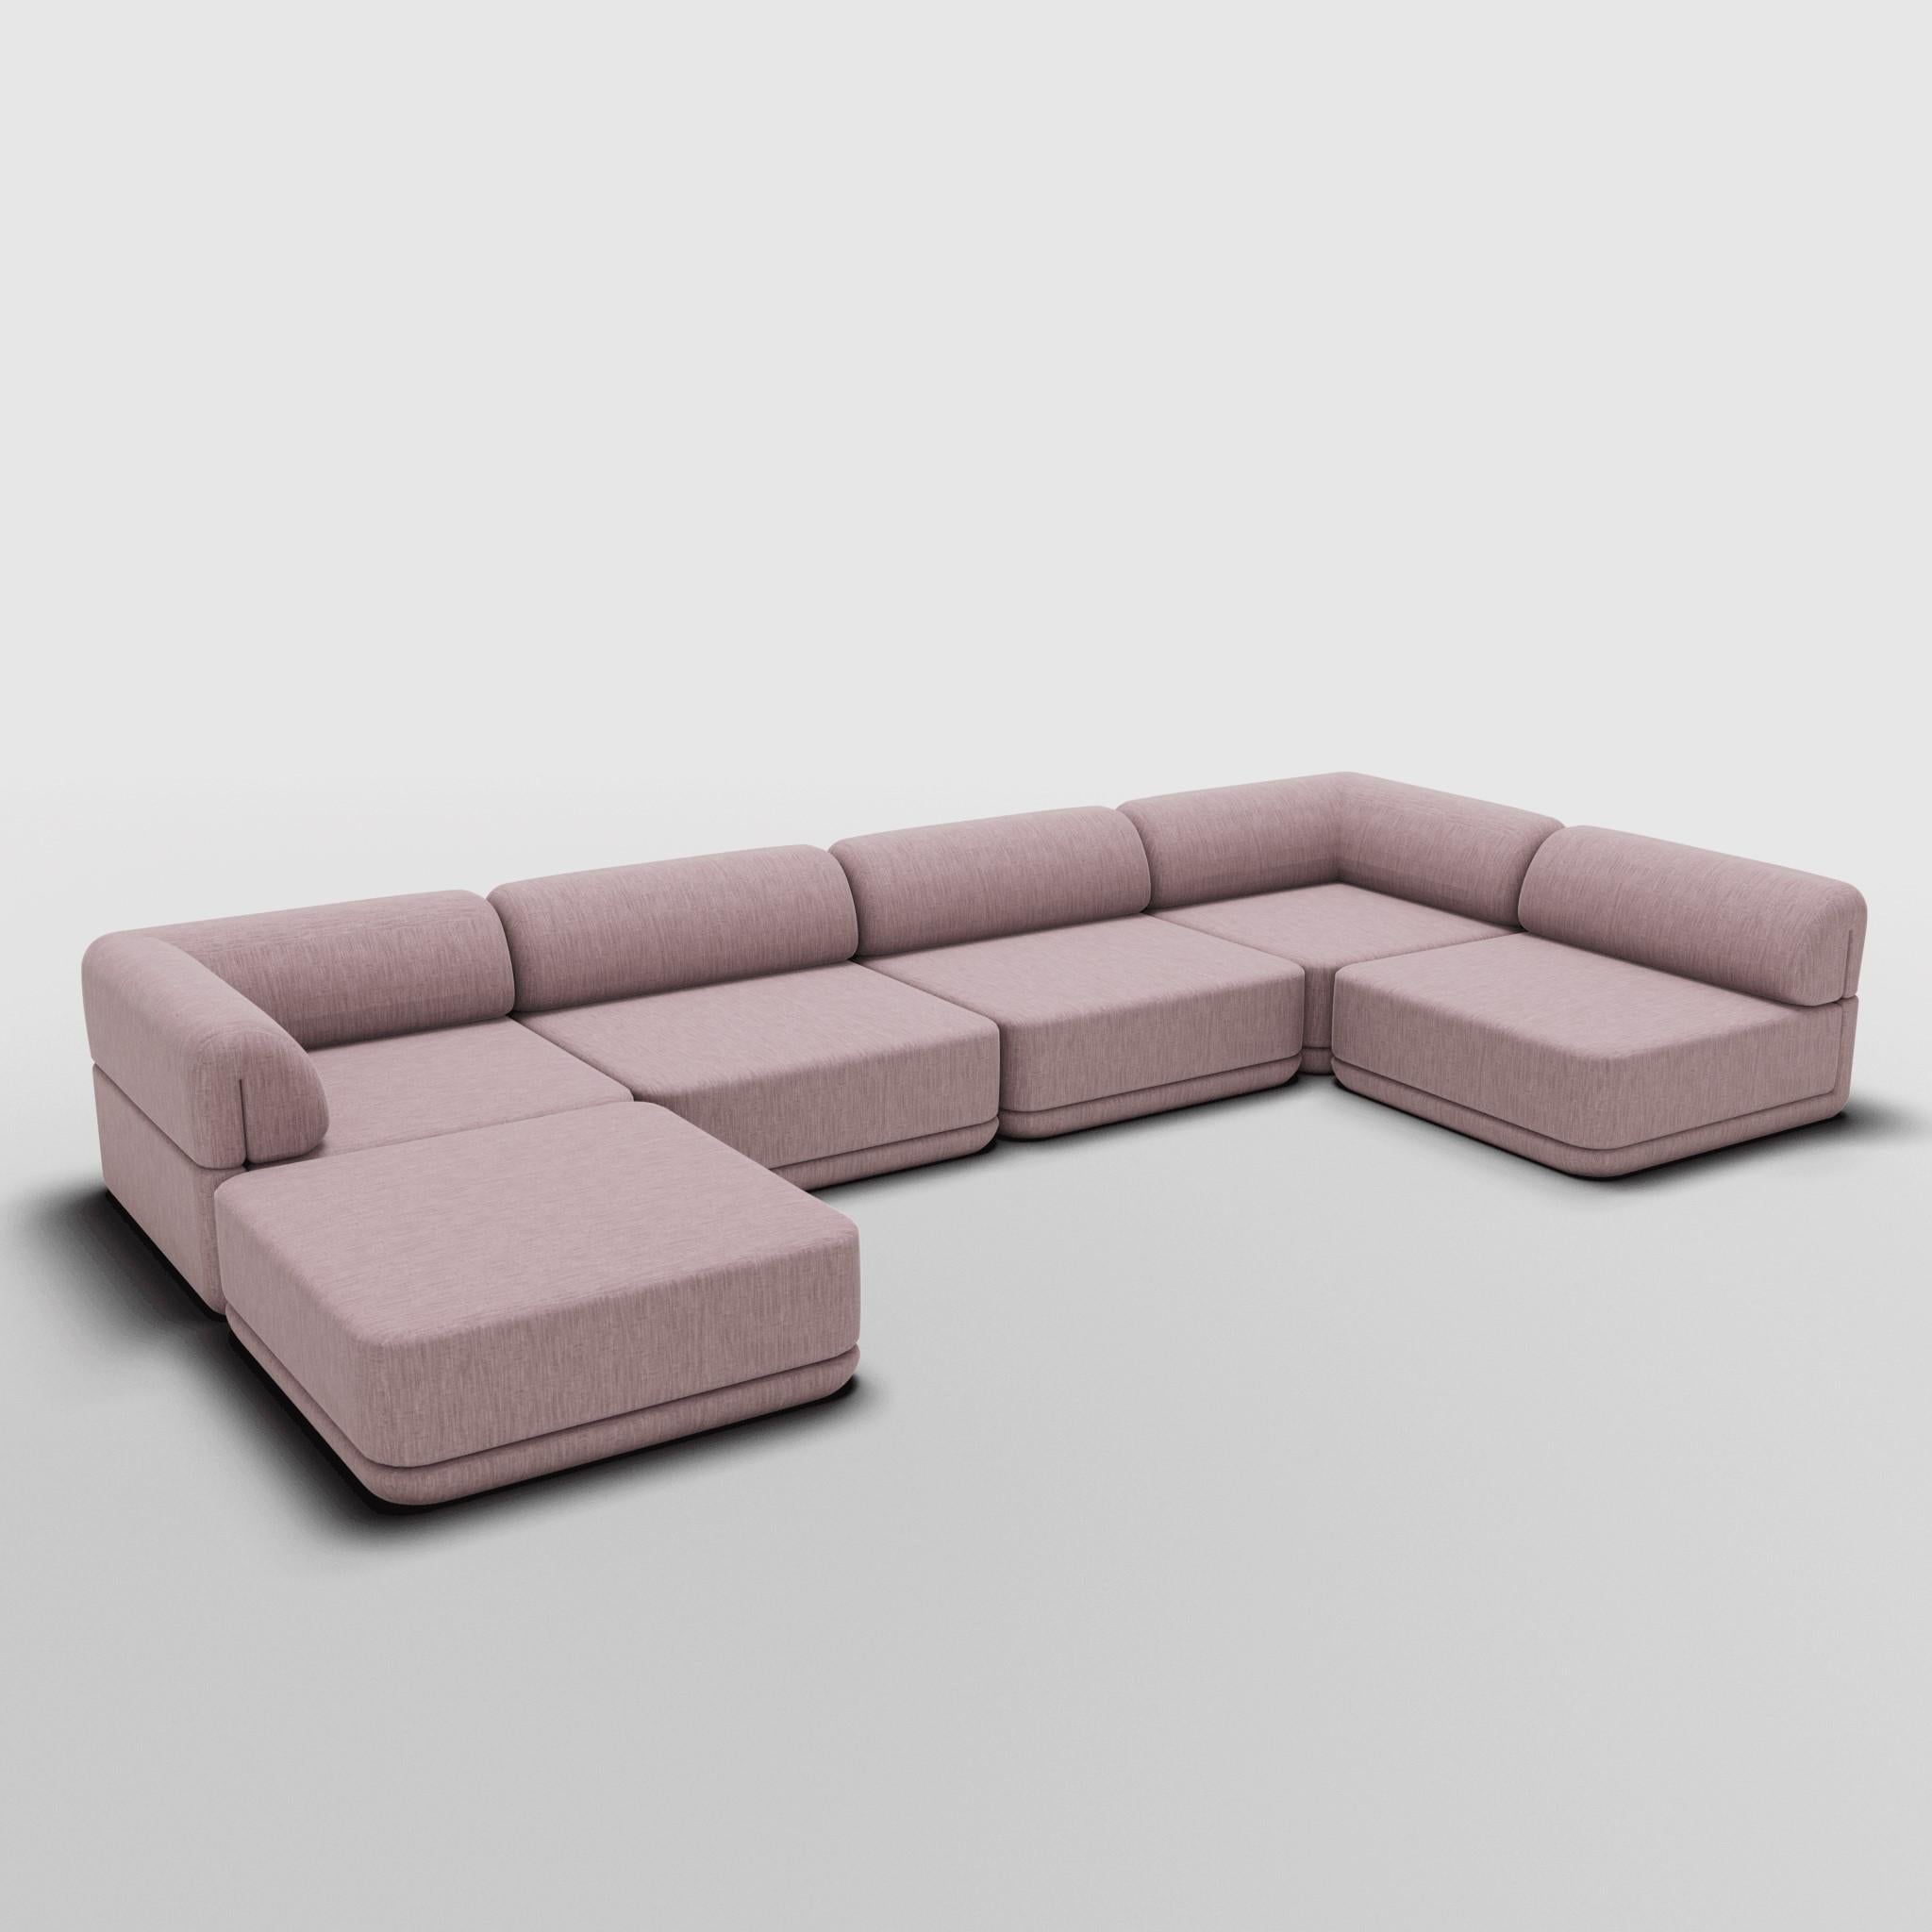 The Cube Sofa - Low Lounge Sectional For Sale 1